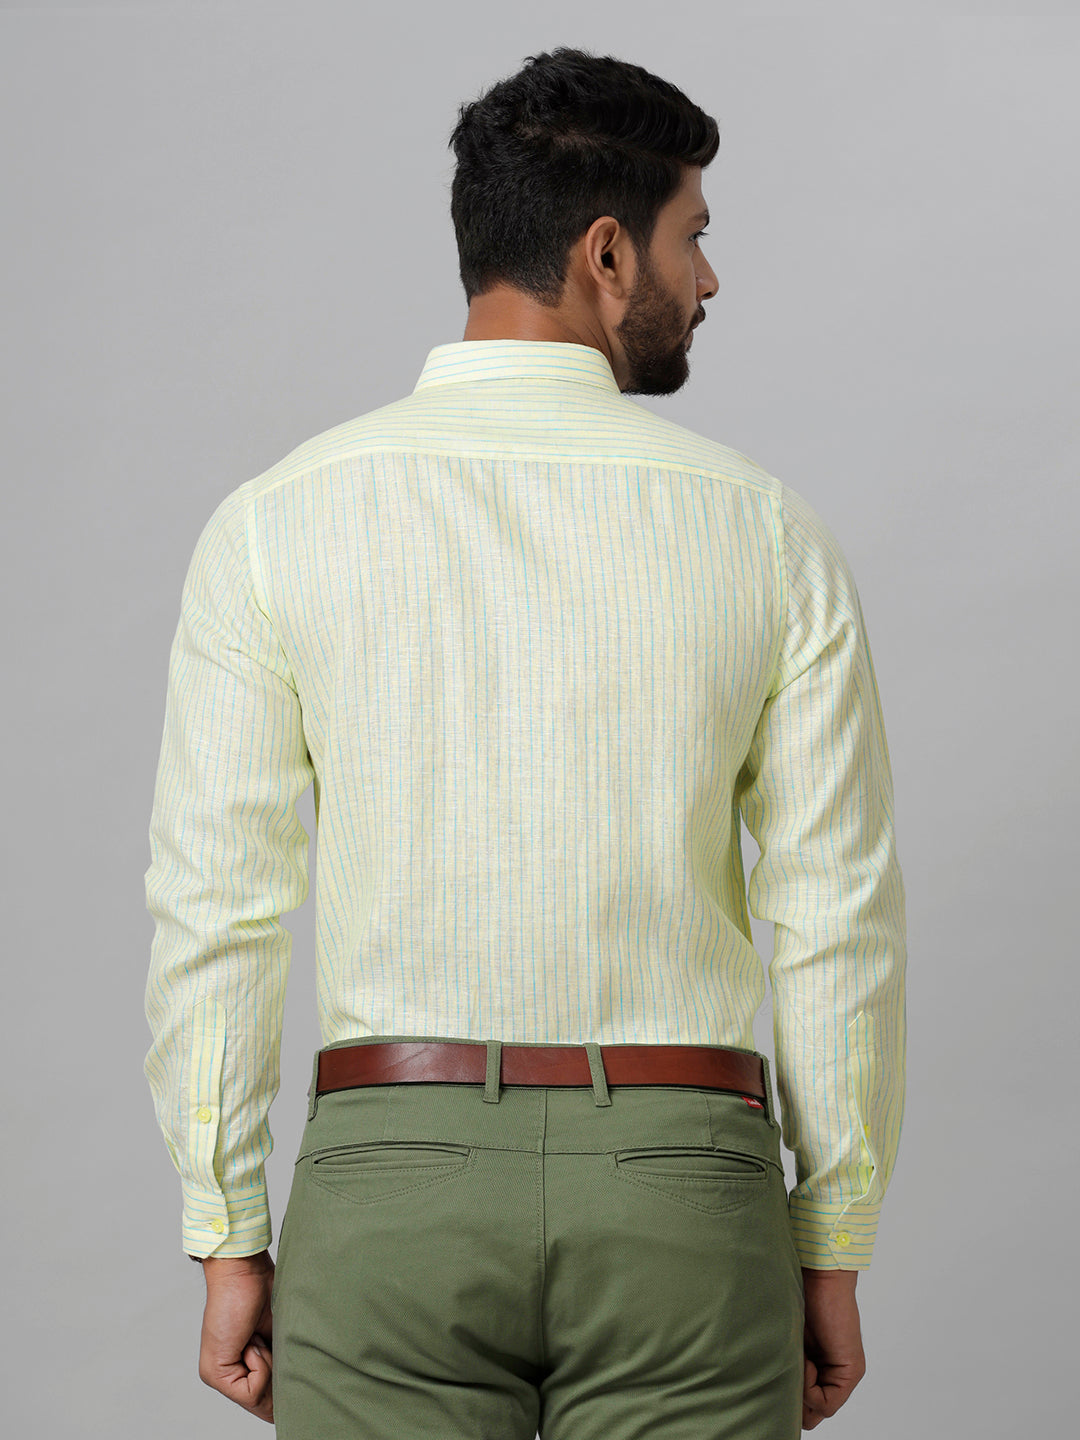 Mens Pure Linen Striped Full Sleeves Yellow Shirt LS27-Back view